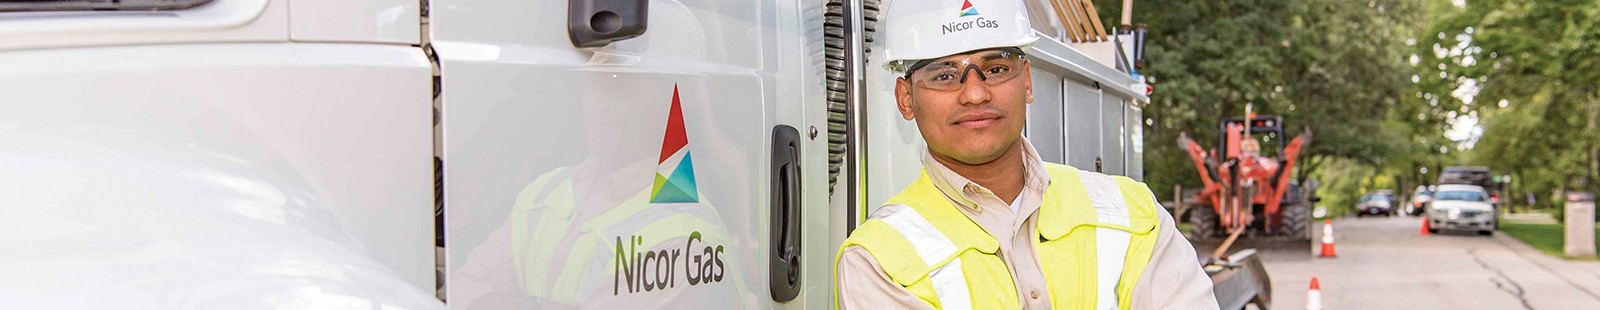 Nicor Gas worker and truck